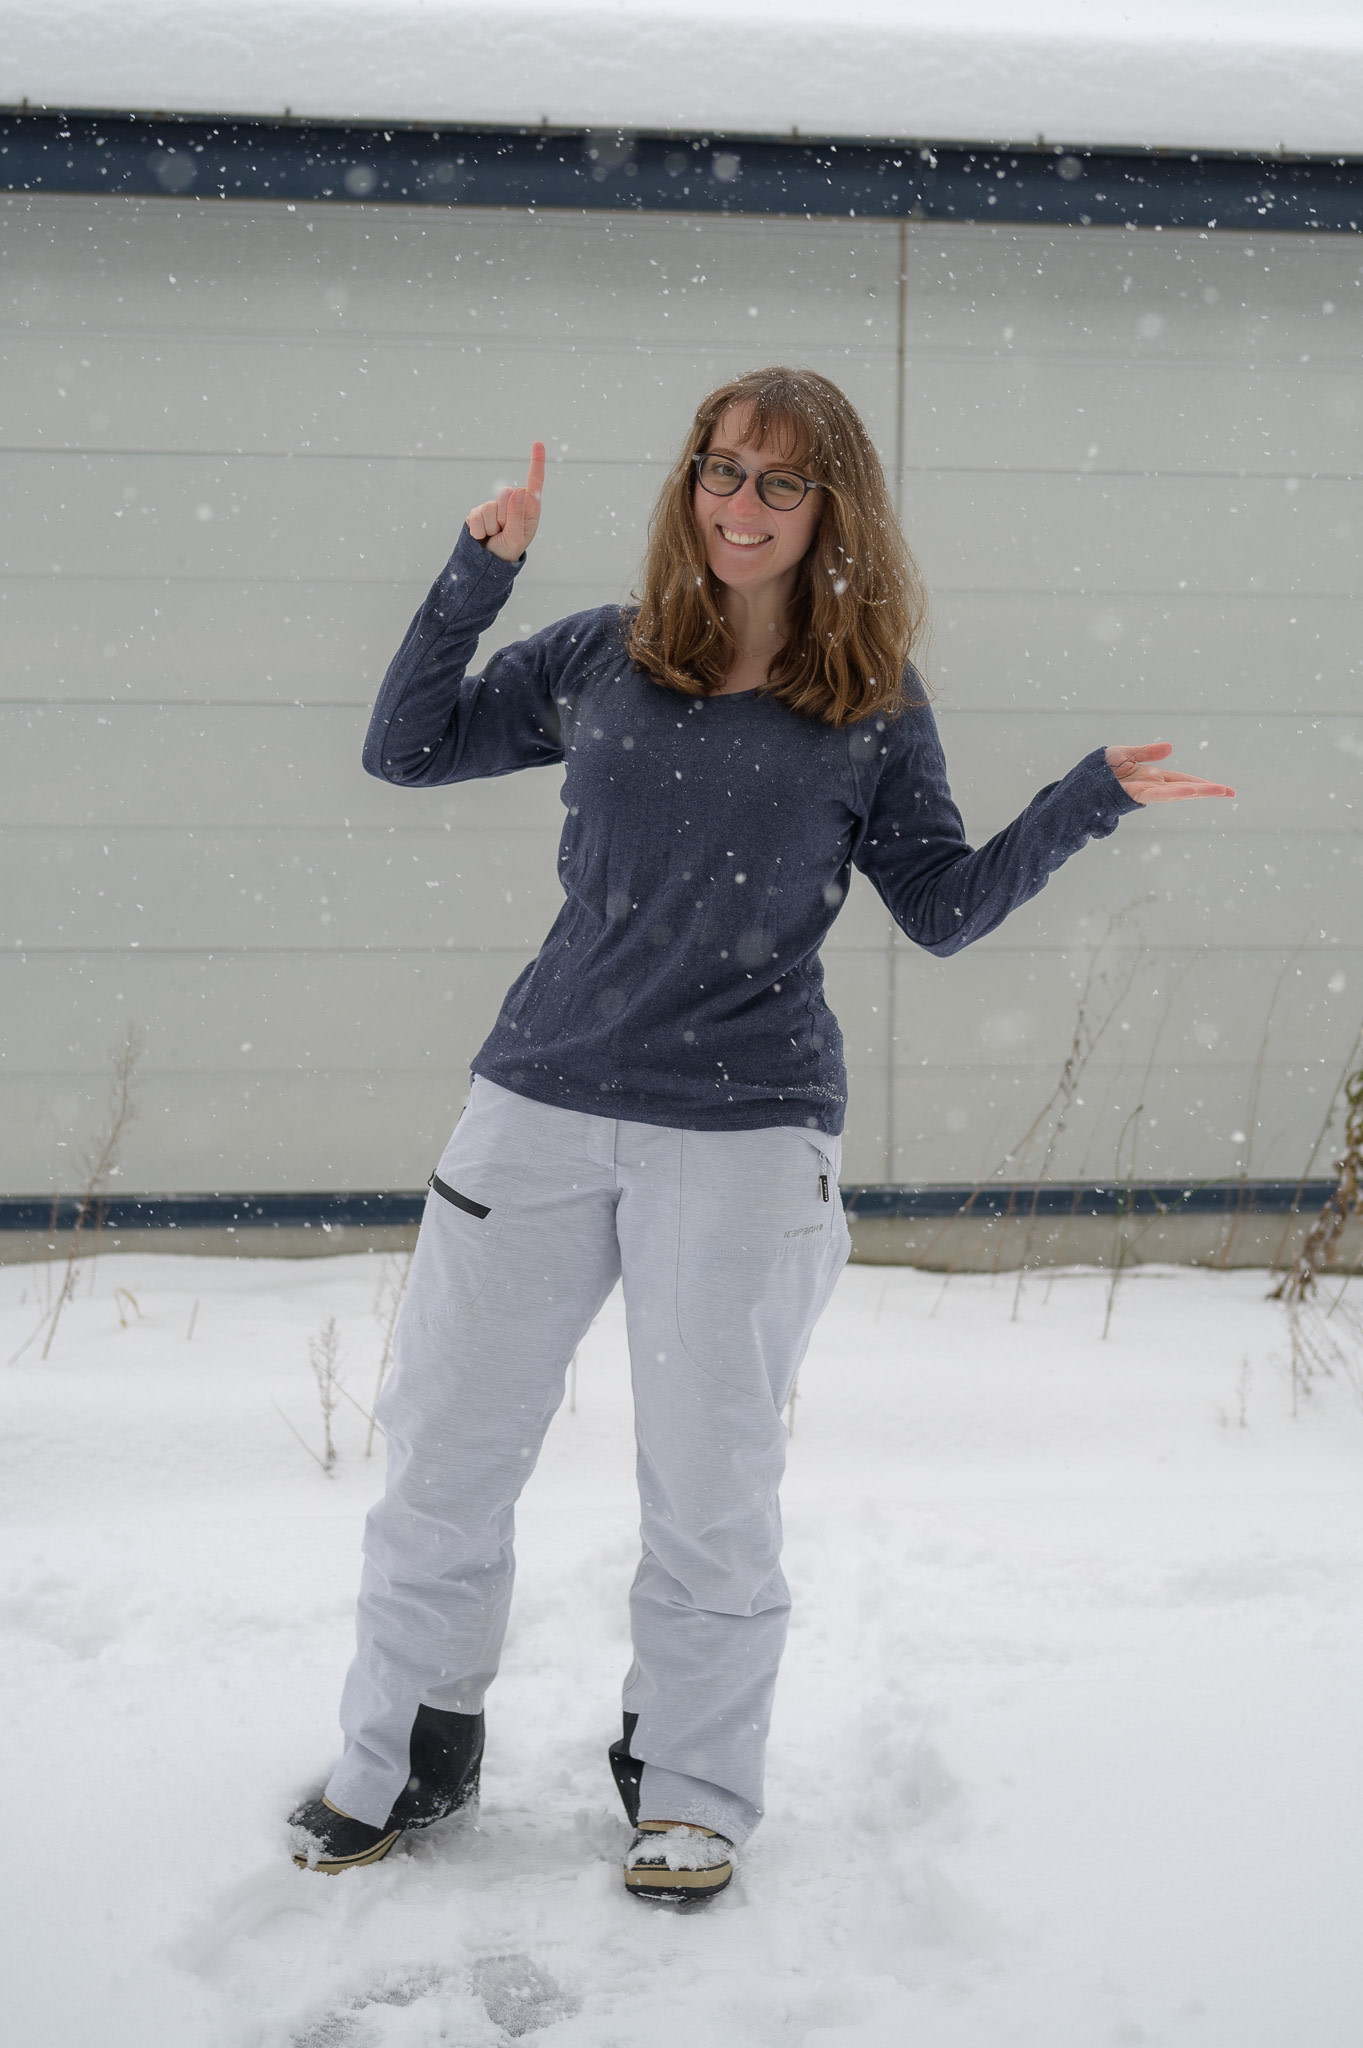 A girl wearing glasses stands in the snow wearing ski pants and a fleece top.